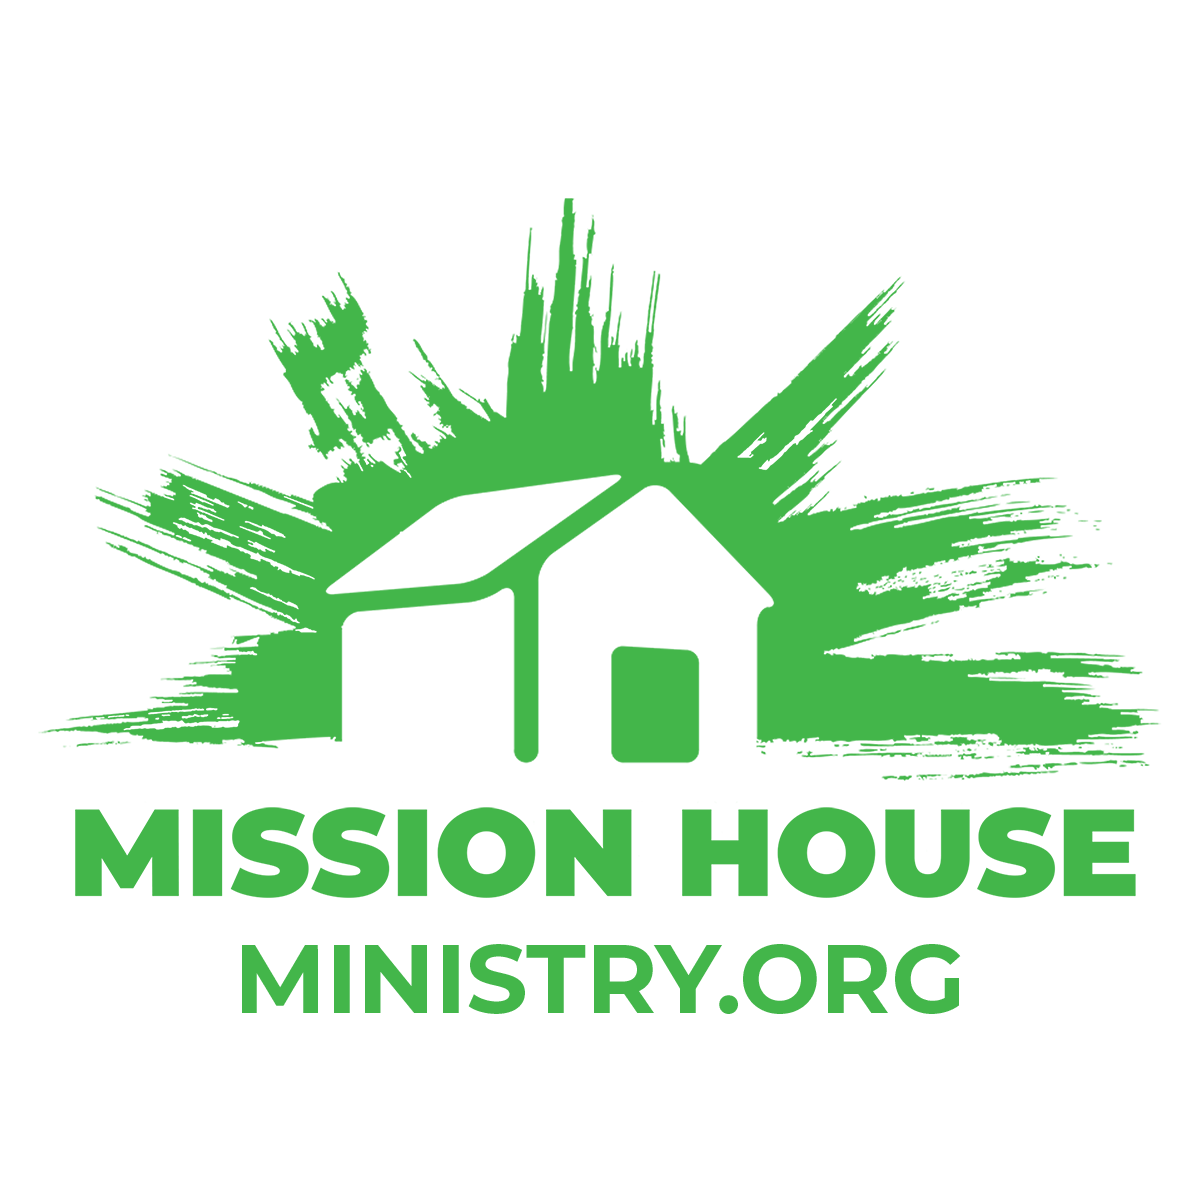 Mission House Ministry